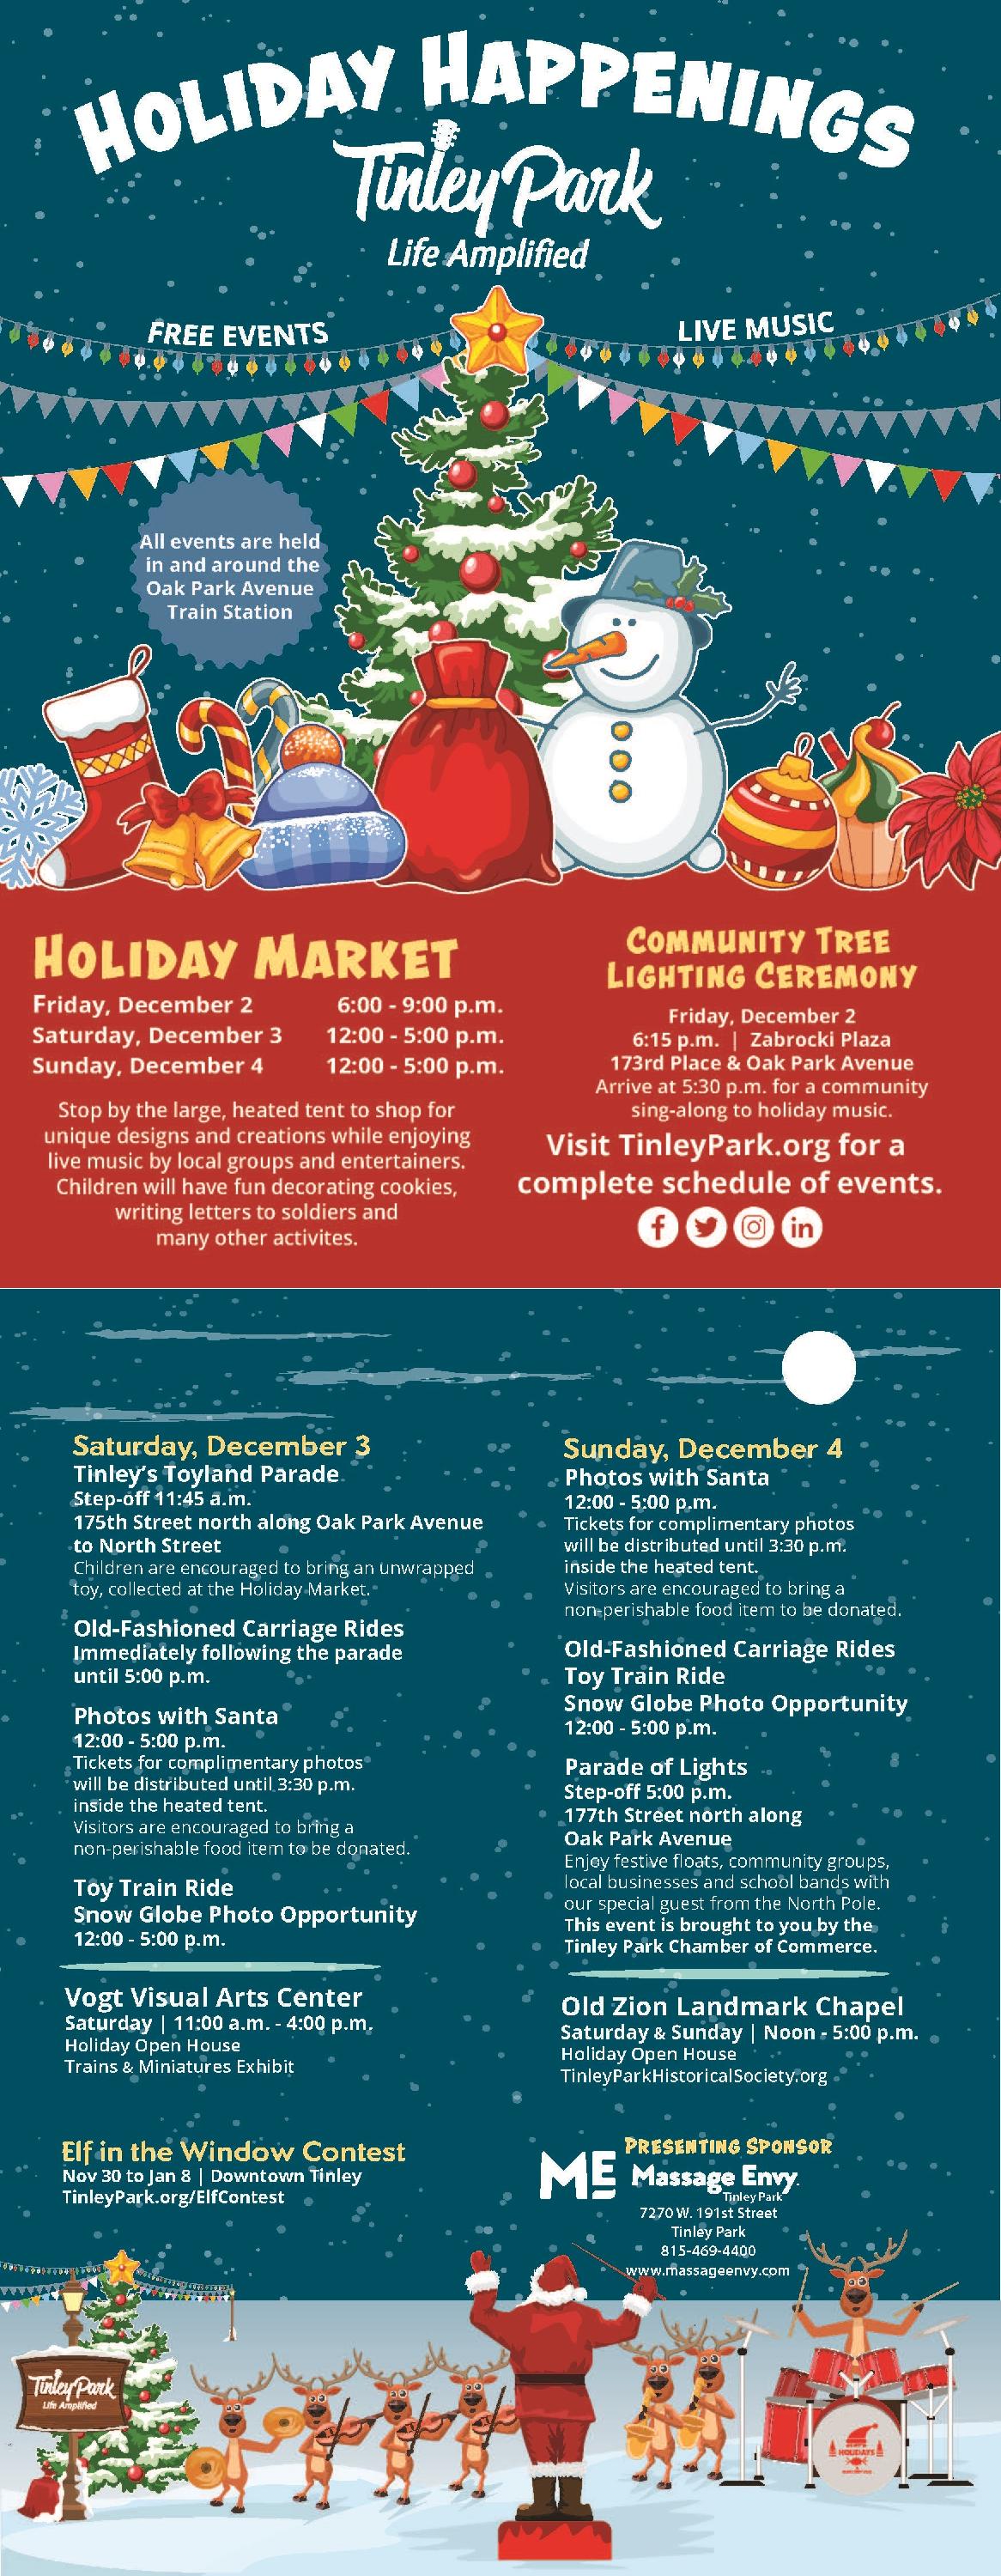 2022 Holiday Happenings Flyer Vertical2